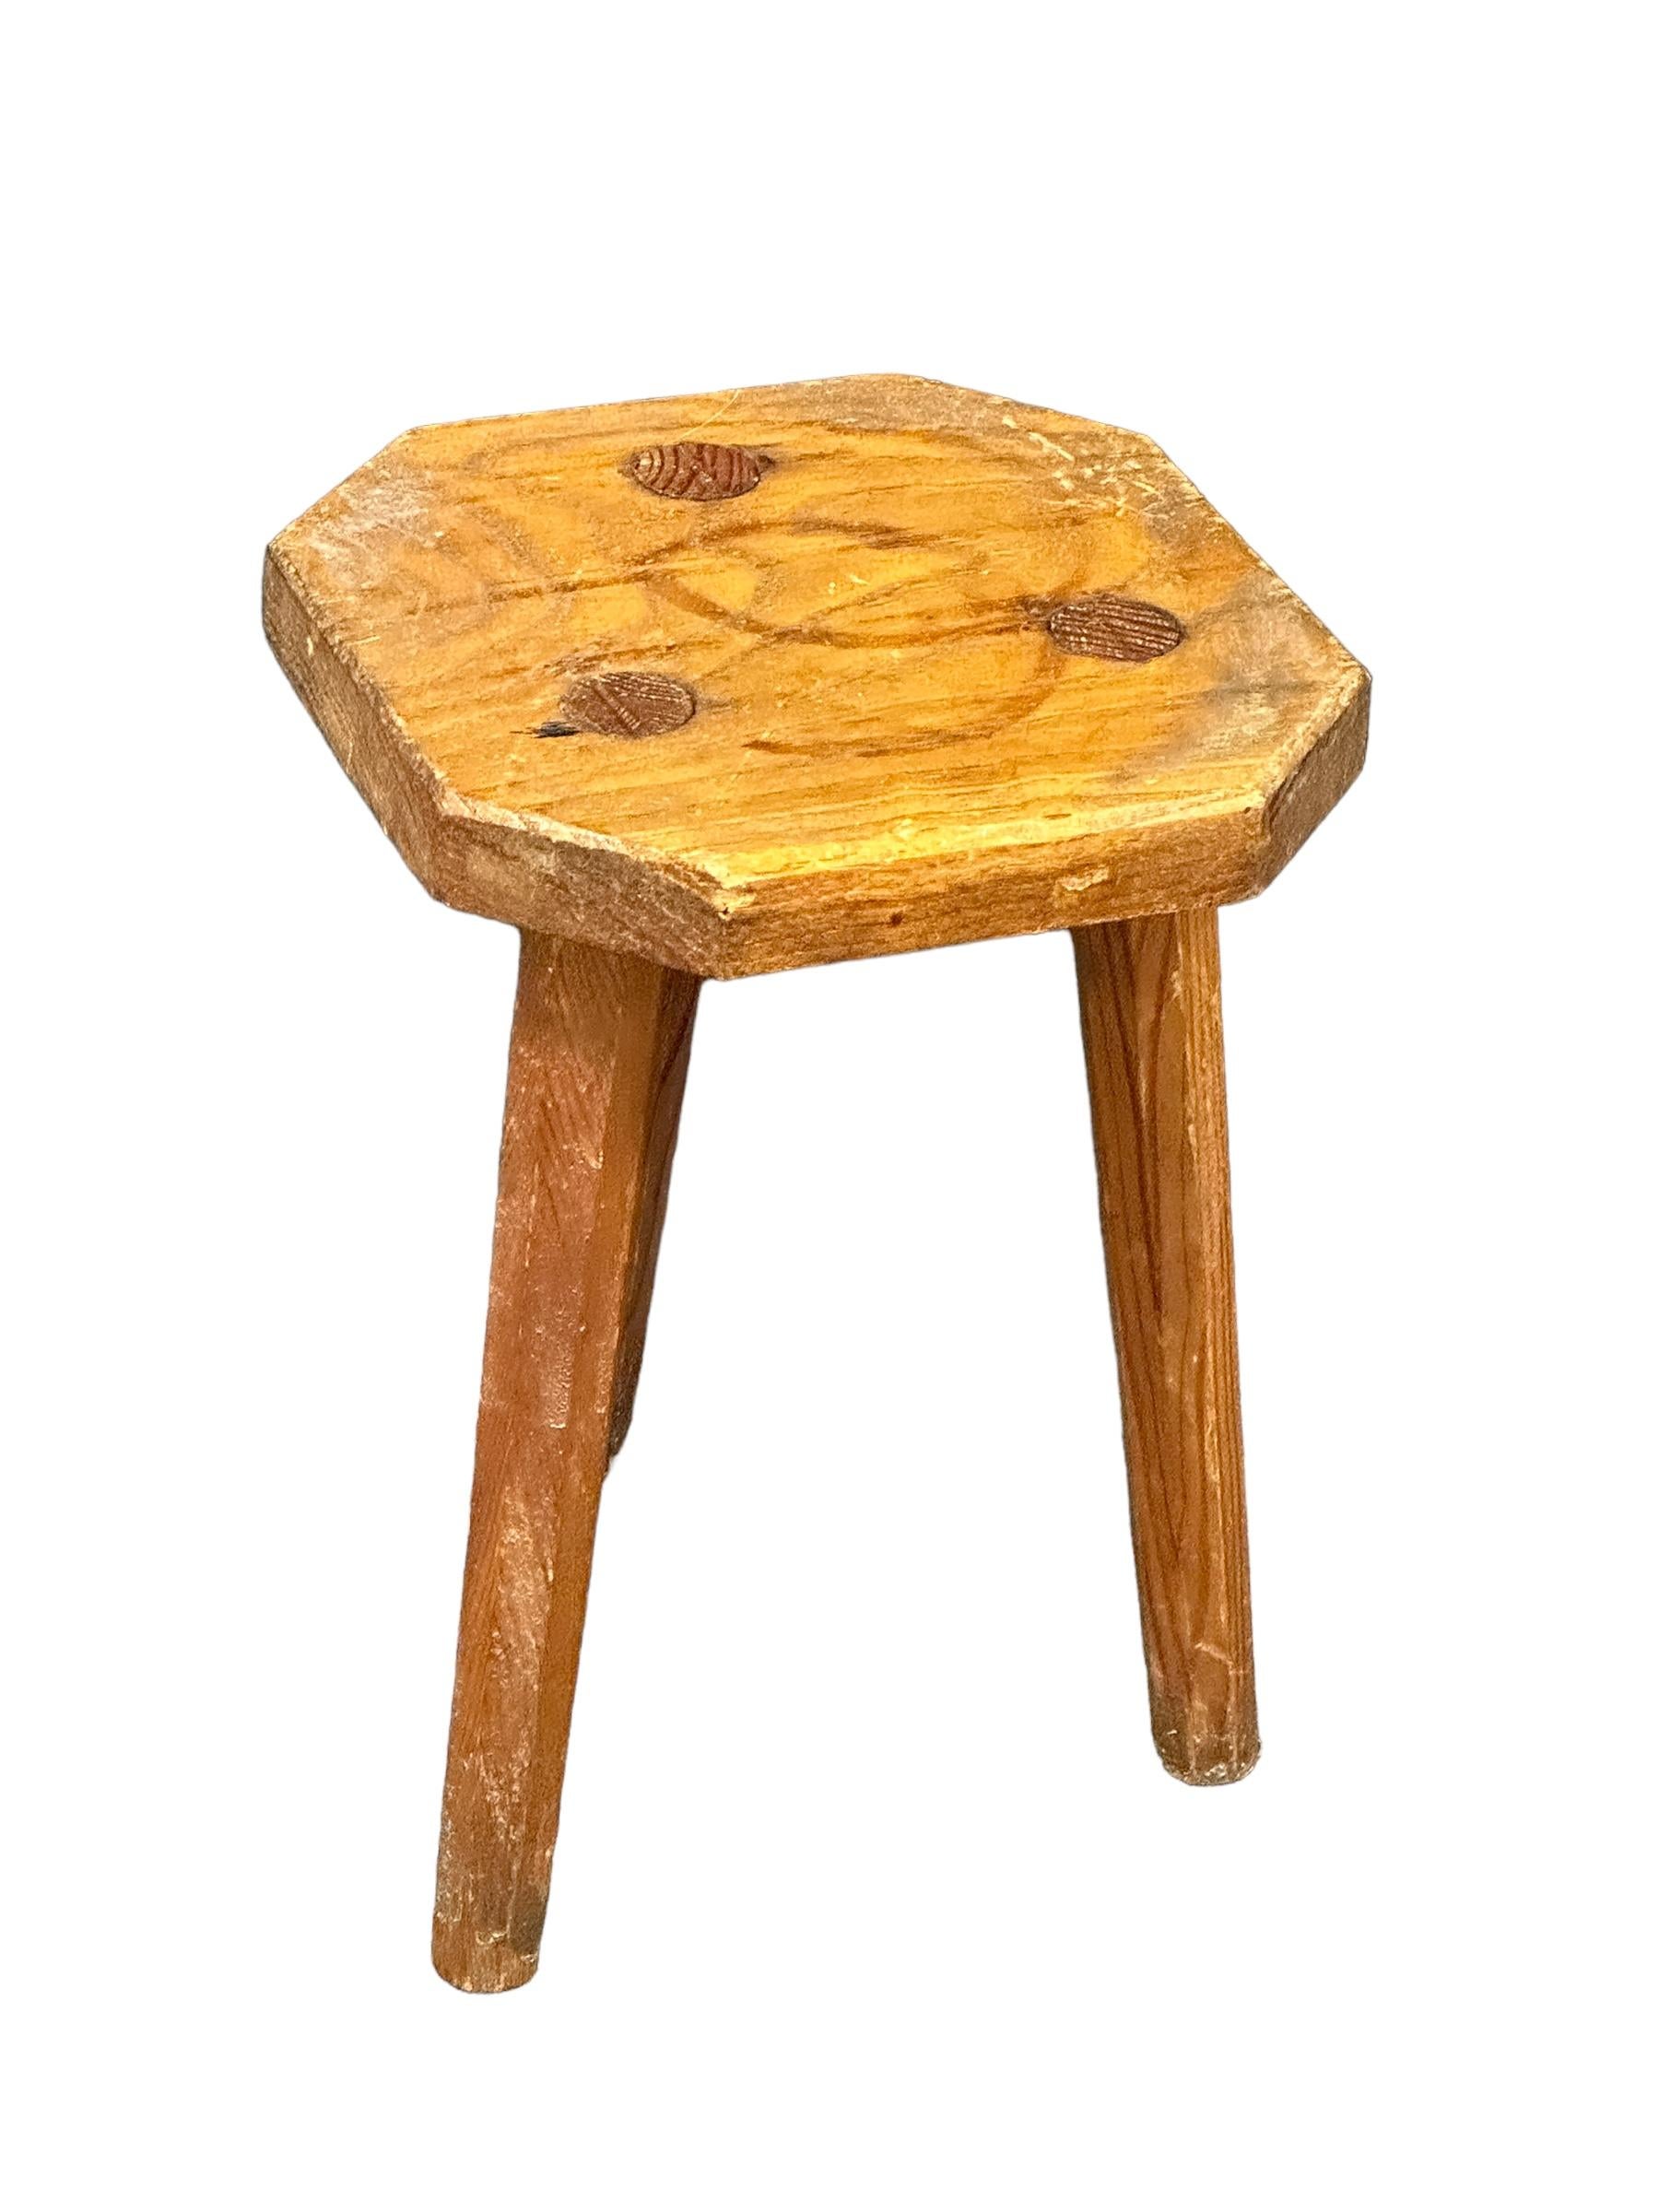 This early 20th century wabi sabi 3 leg workshop stool from Italy is an excellent example of this style. The piece has a octagonal, rustic-looking seat made of wood and is supported by three legs. The stool has a simple, understated design which is